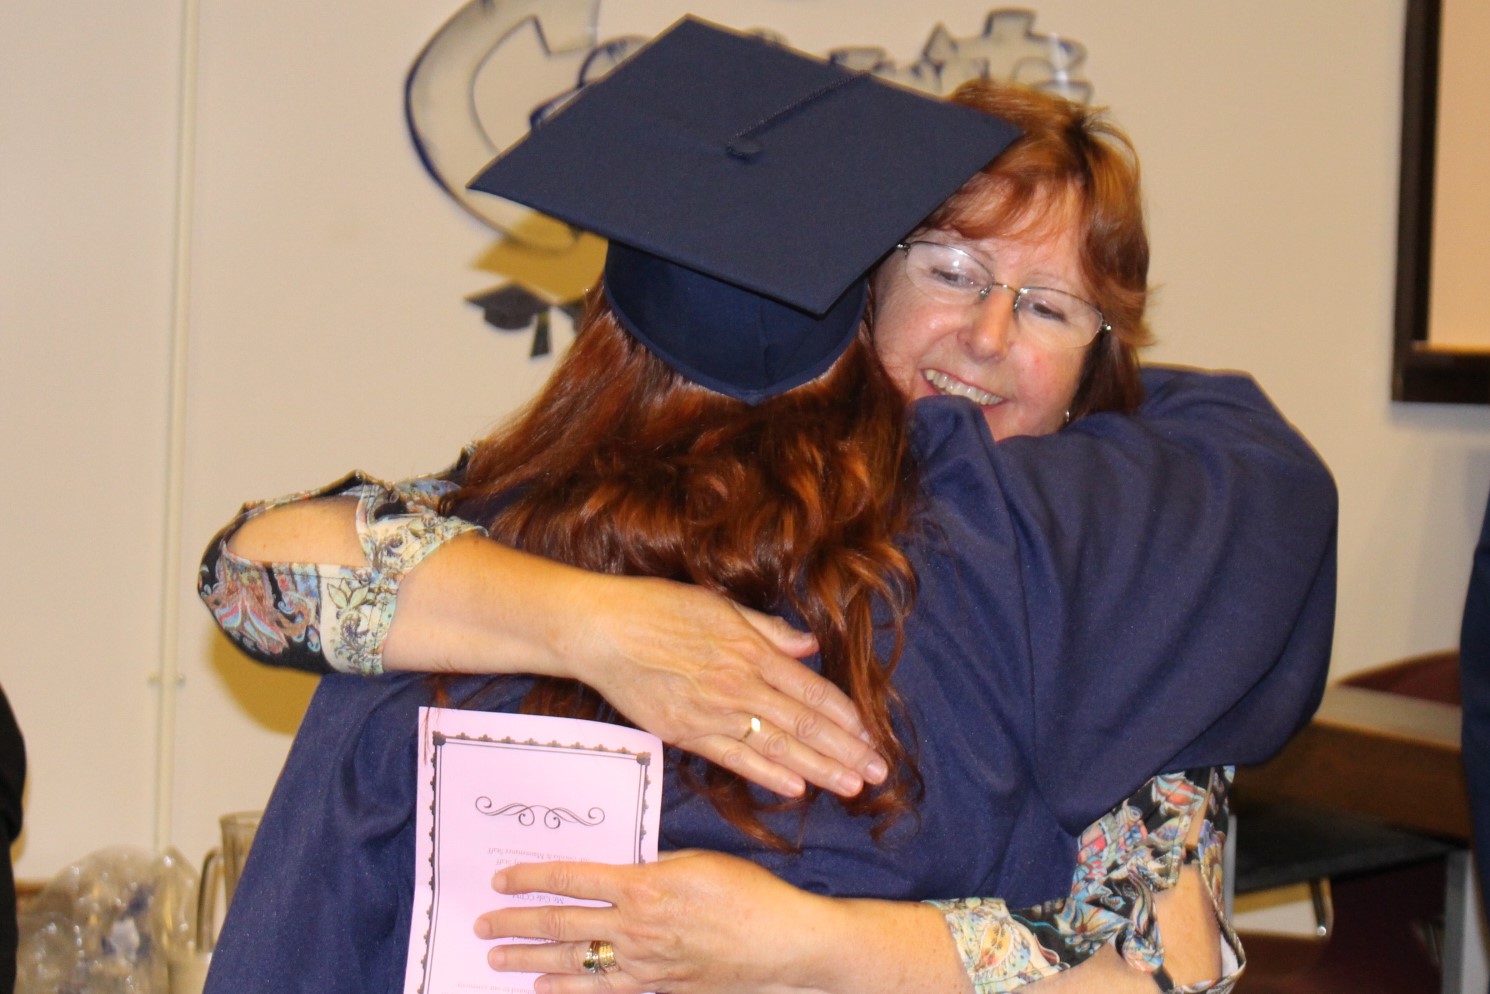 A family member hugs her inmate after graduation